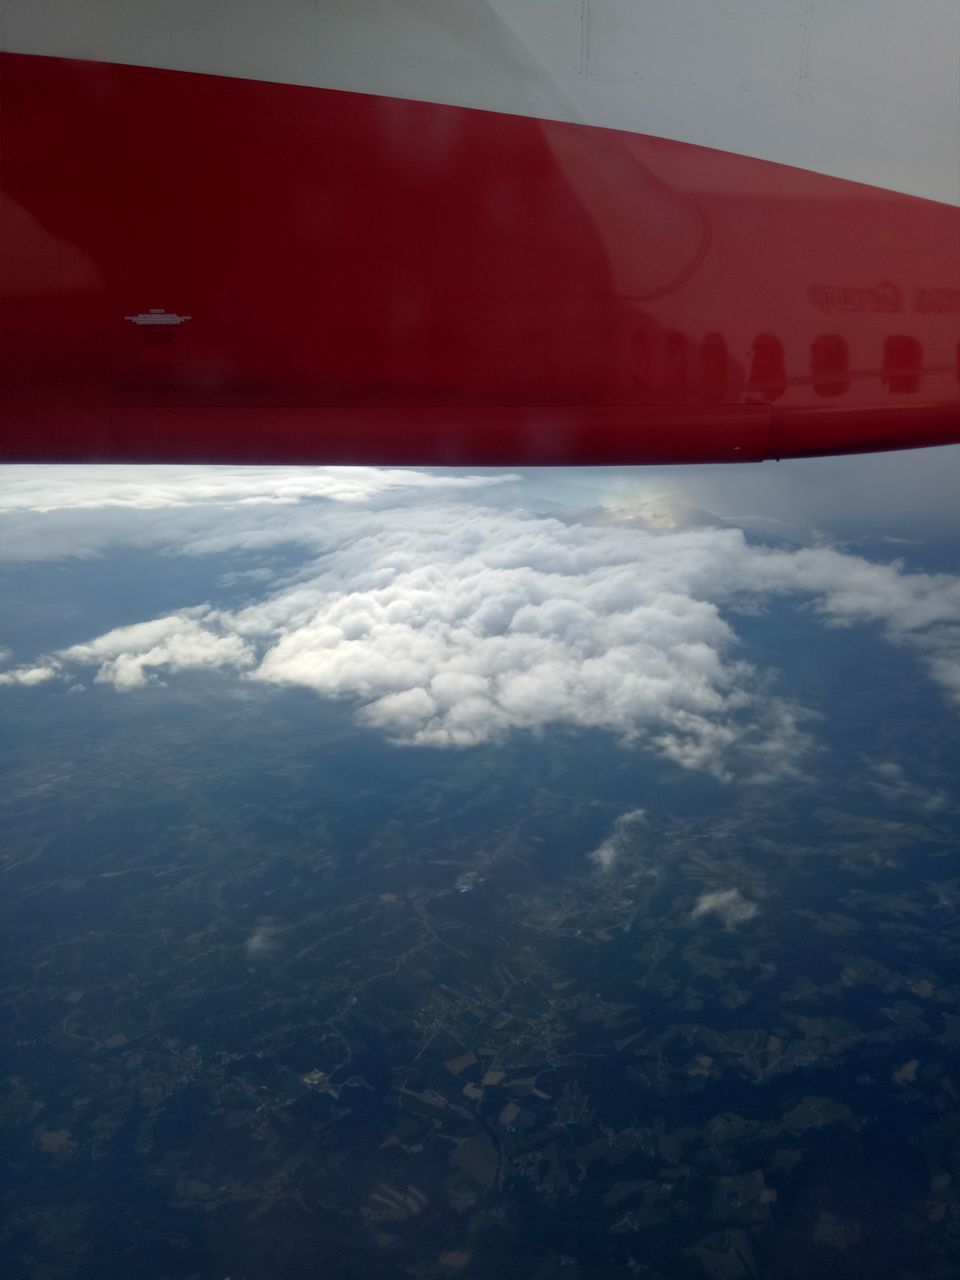 AERIAL VIEW OF RED AIRPLANE WING